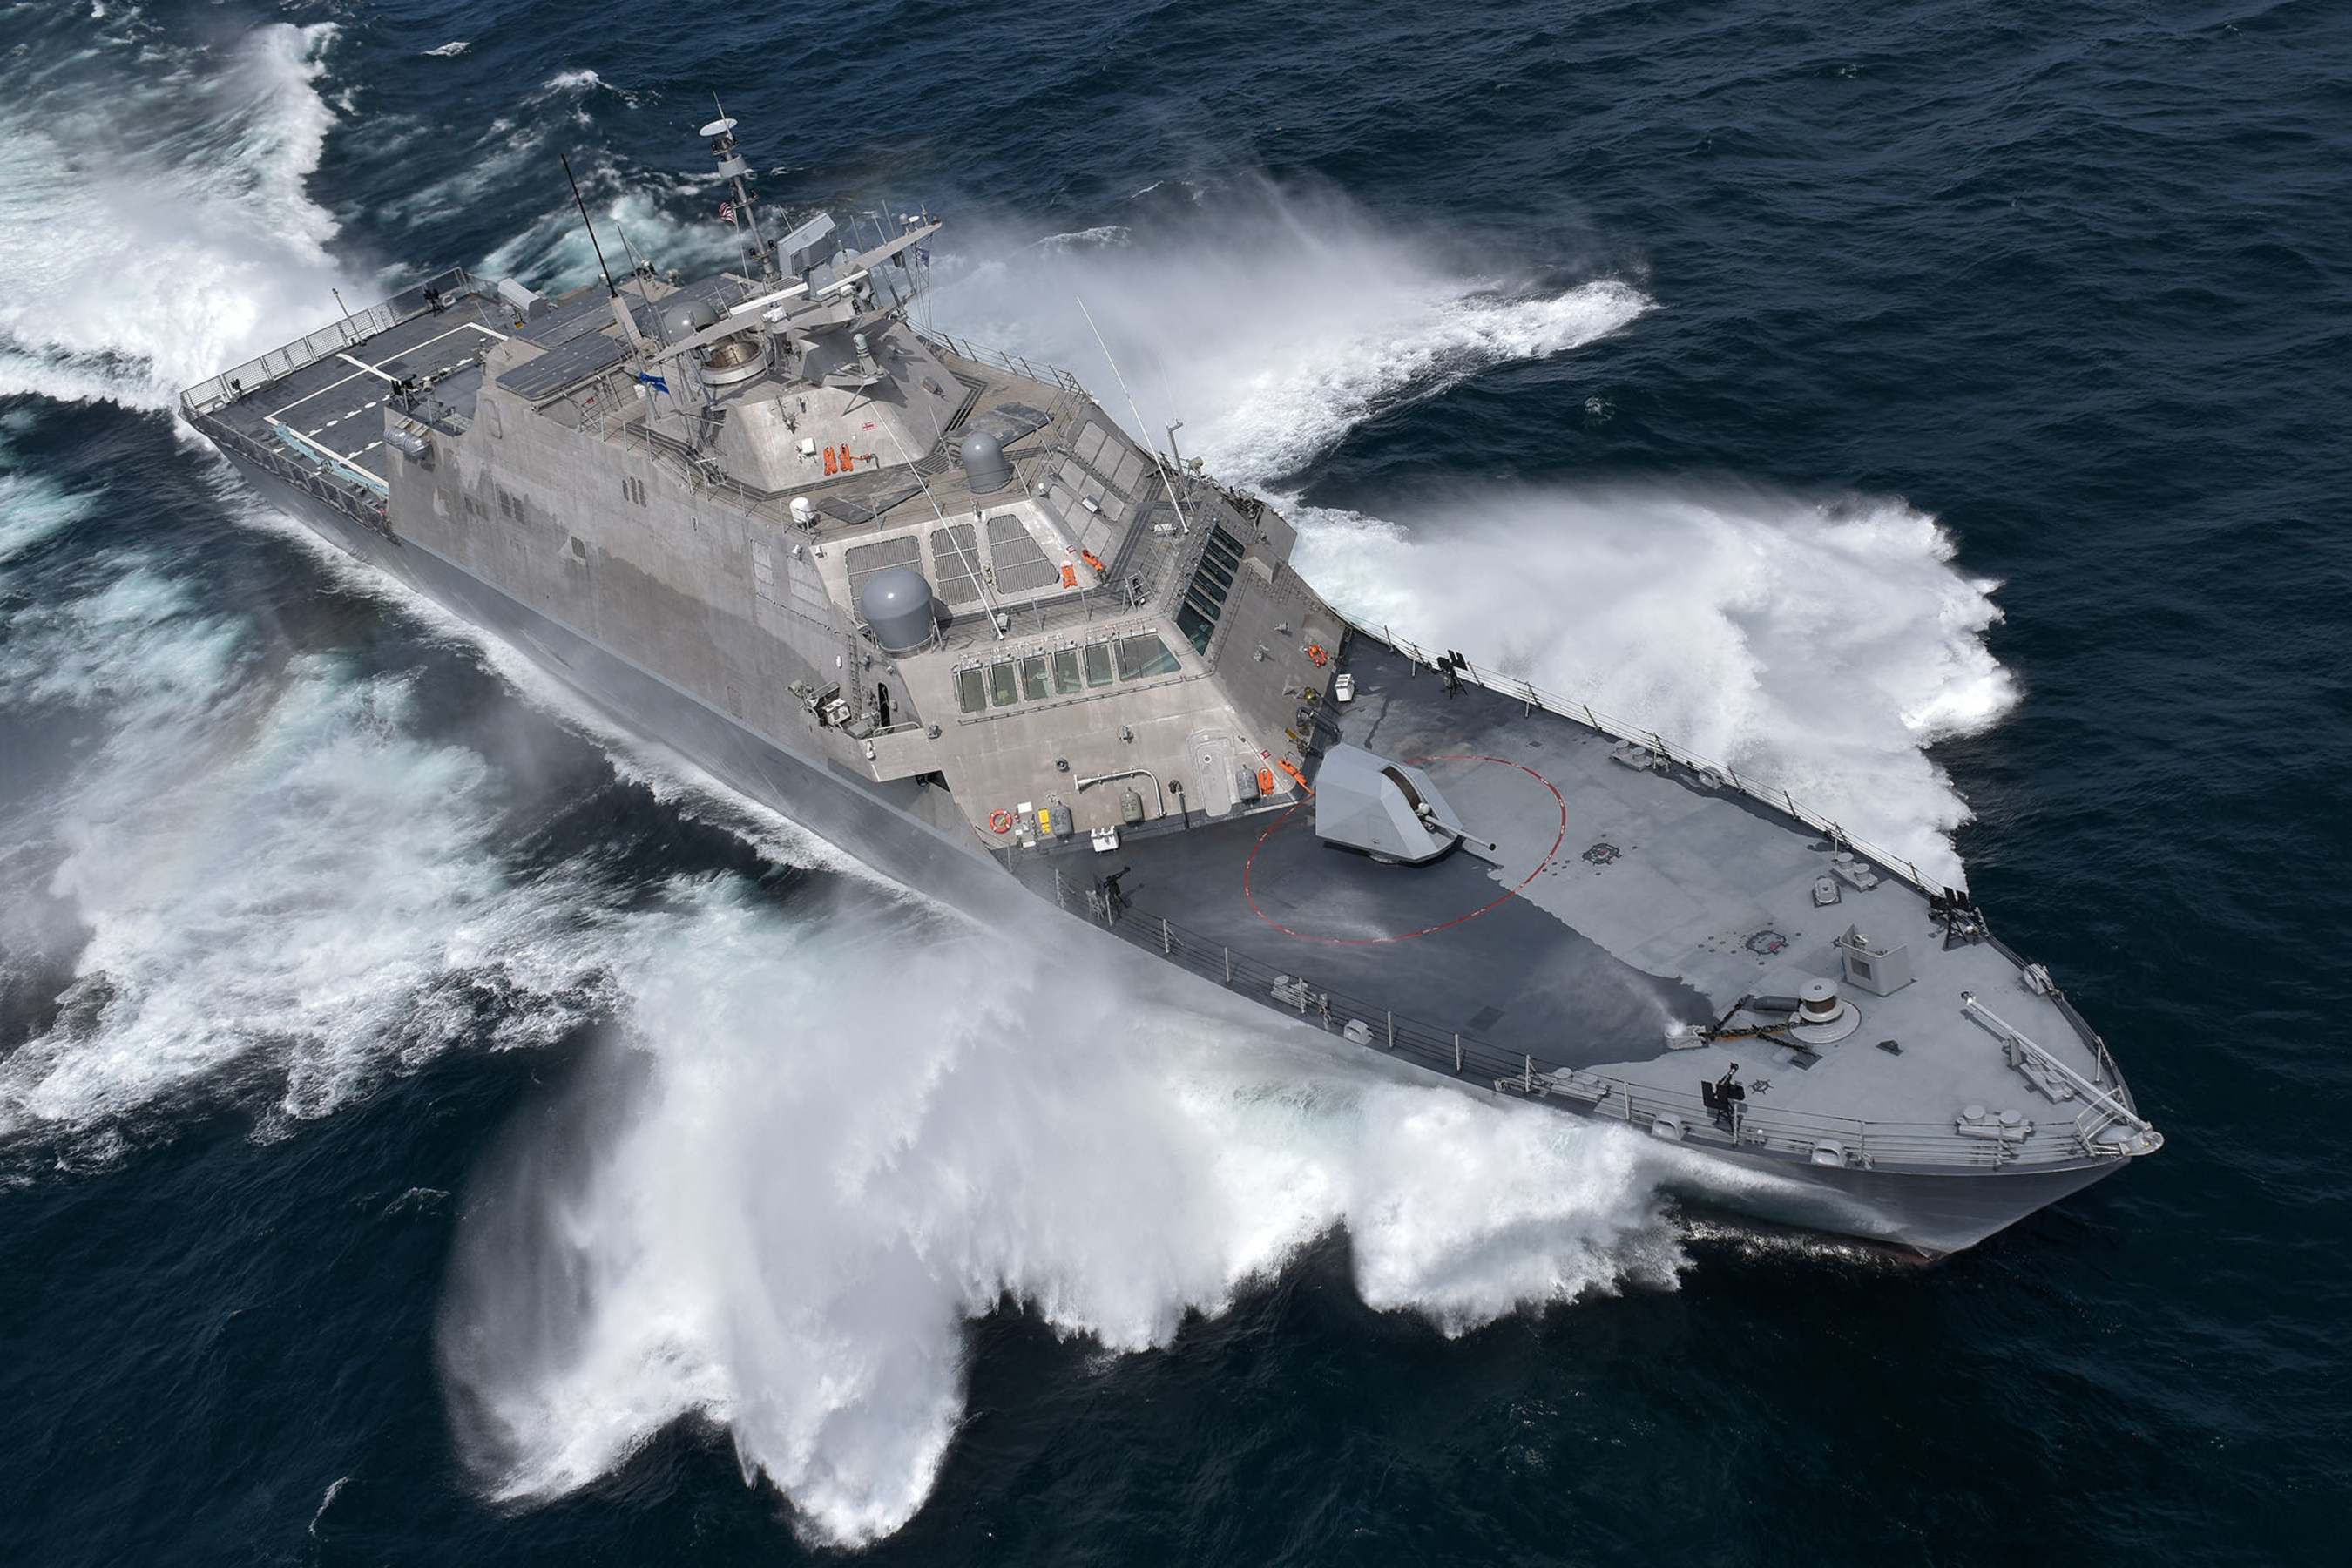 The future USS Detroit, the fourth Freedom-variant Littoral Combat Ship delivered to the U.S. Navy, underway during Acceptance Trials on July 13, 2016. The future USS Detroit will be commissioned in Detroit on Oct. 22, 2016.